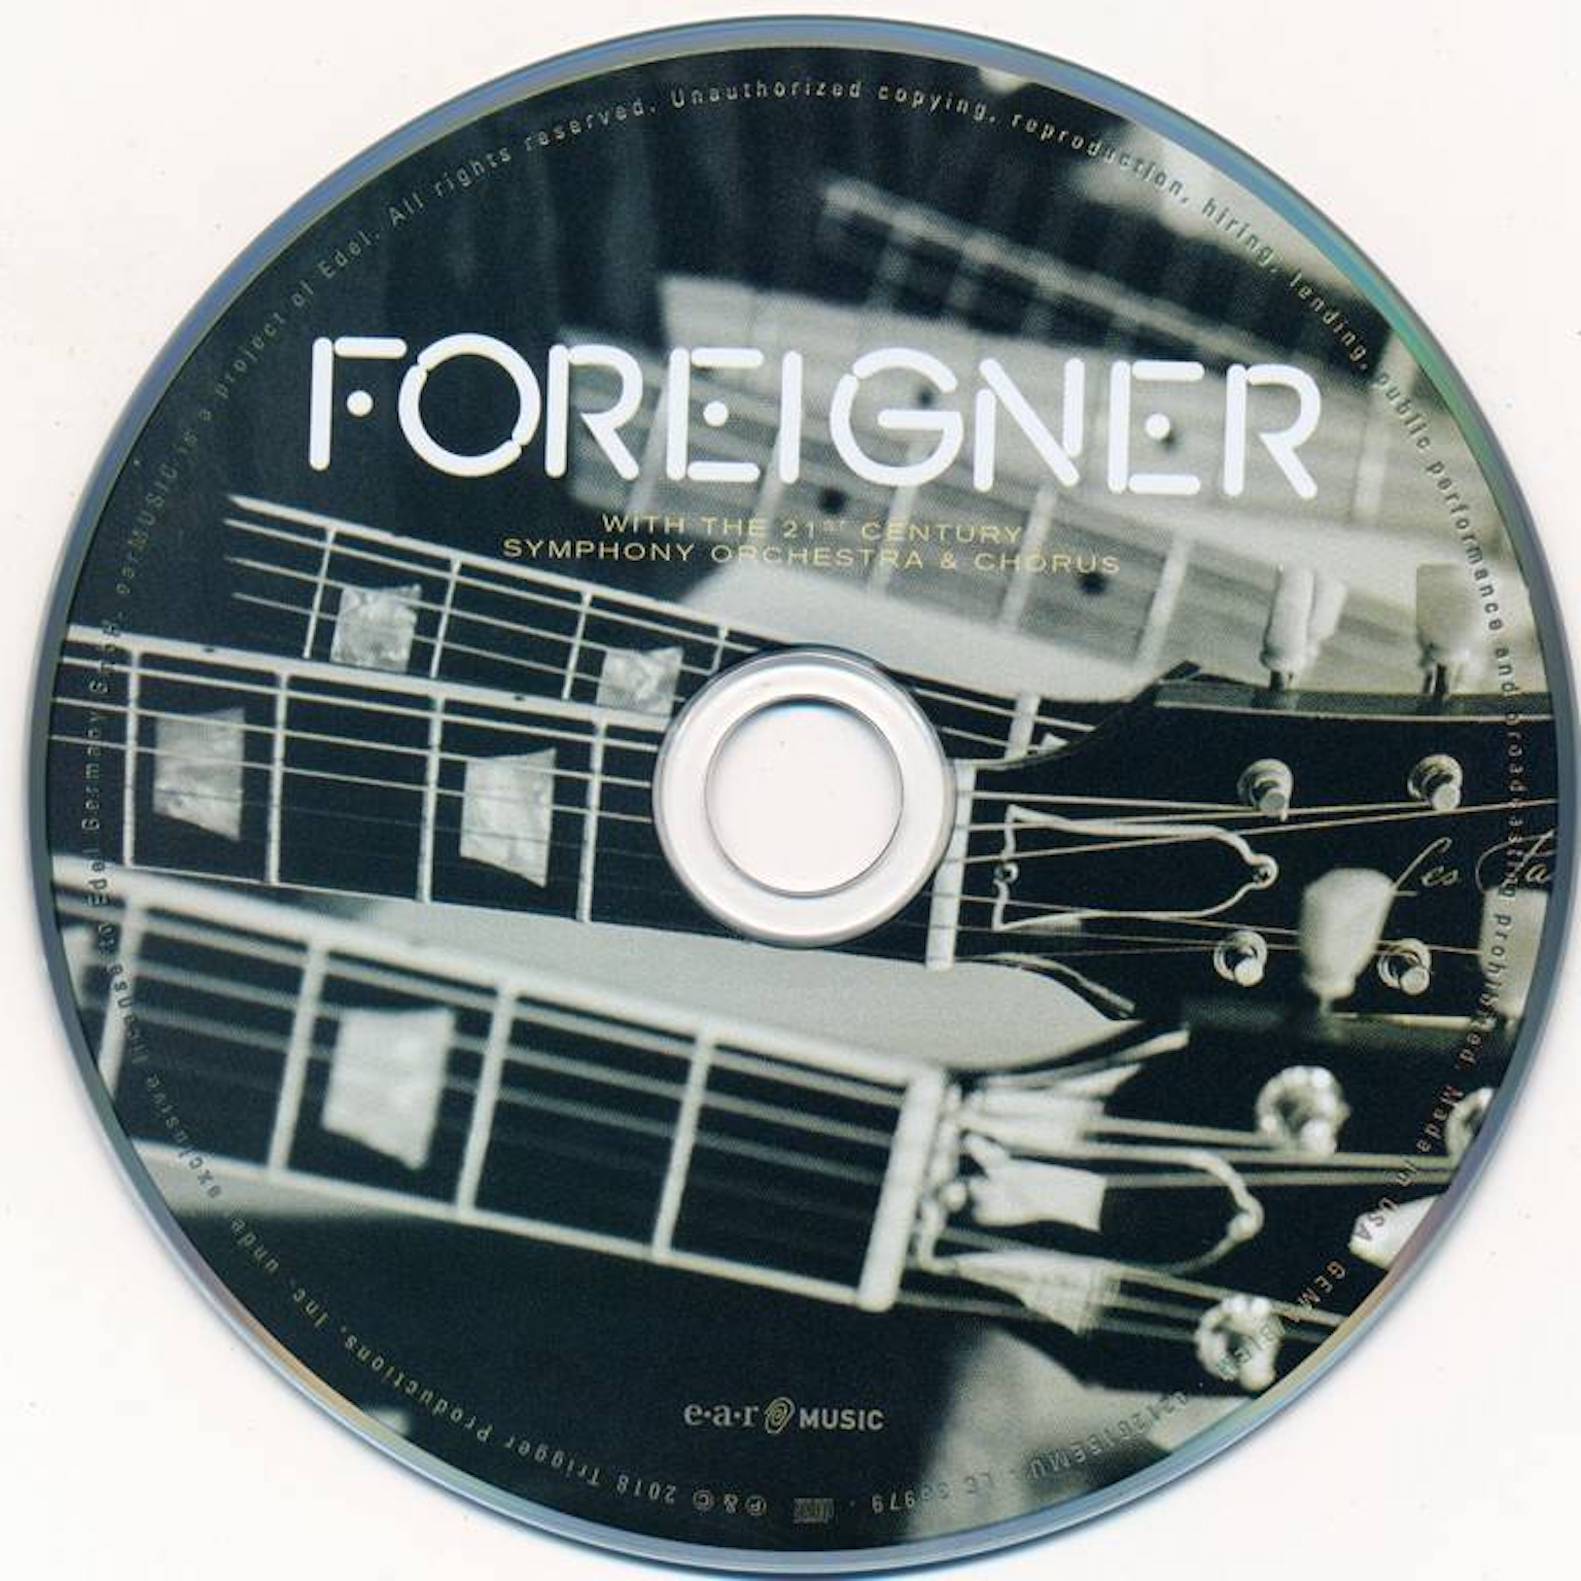 Chorus orchestra. Foreigner - with the 21st Century Symphony Orchestra & Chorus (2018). With the 21st Century Symphony Orchestra & Chorus. Foreigner 2018 Symphony. Foreigner with the 21st Century Orchestra and Choir.